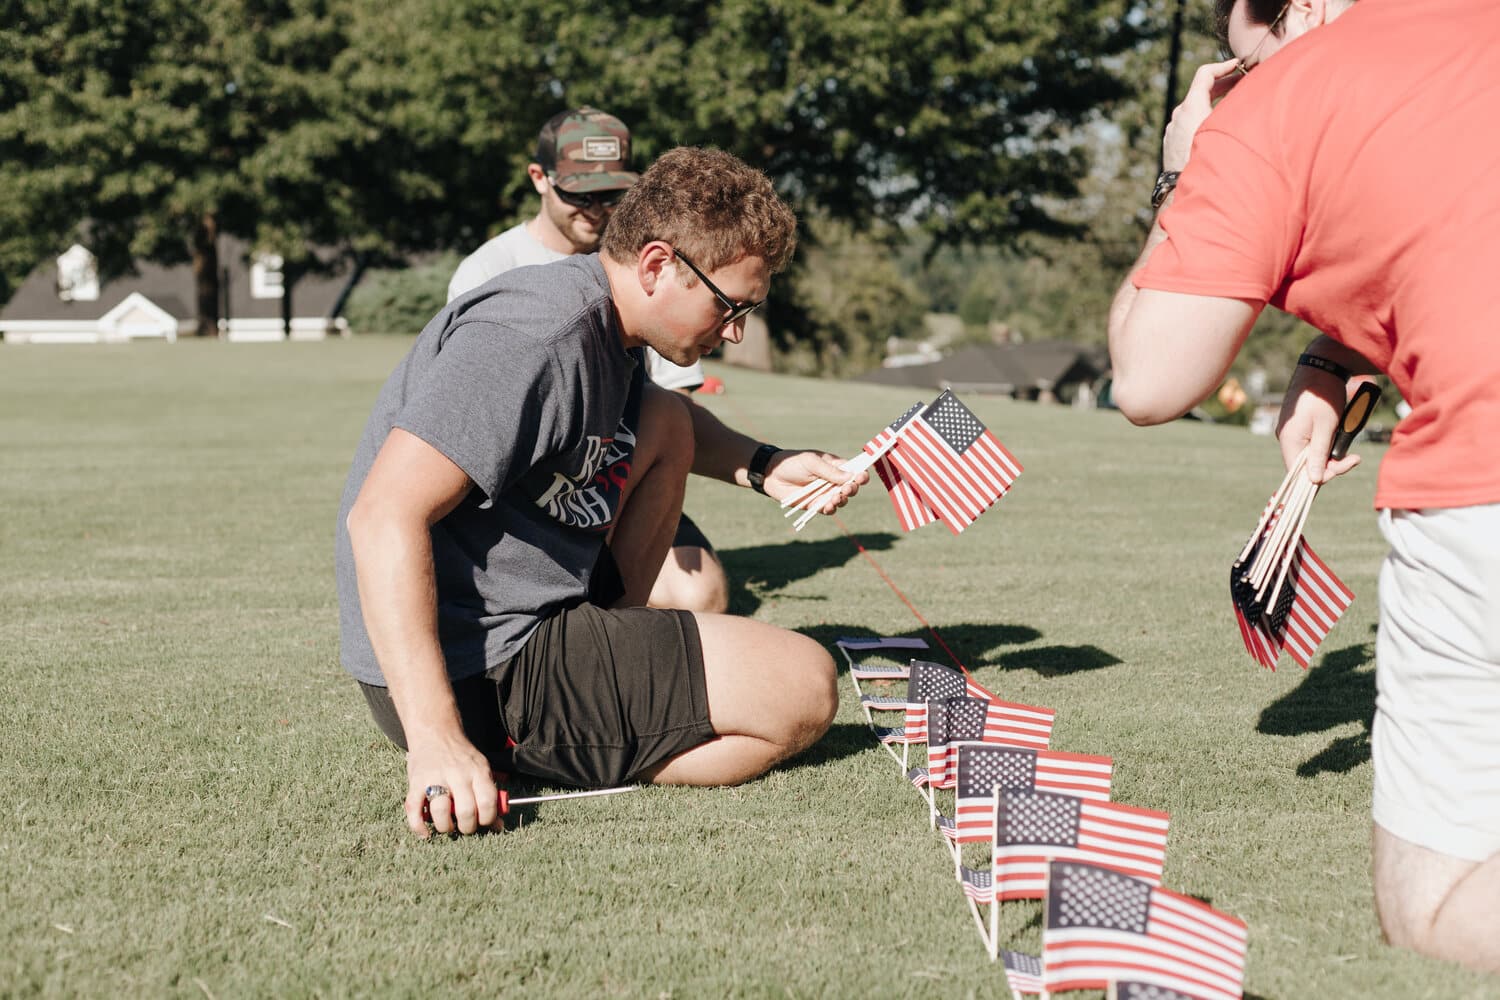 Trace Hogge, a senior at NGU, is focused on the task at hand. He is a committed member of Young Americans for Freedom.